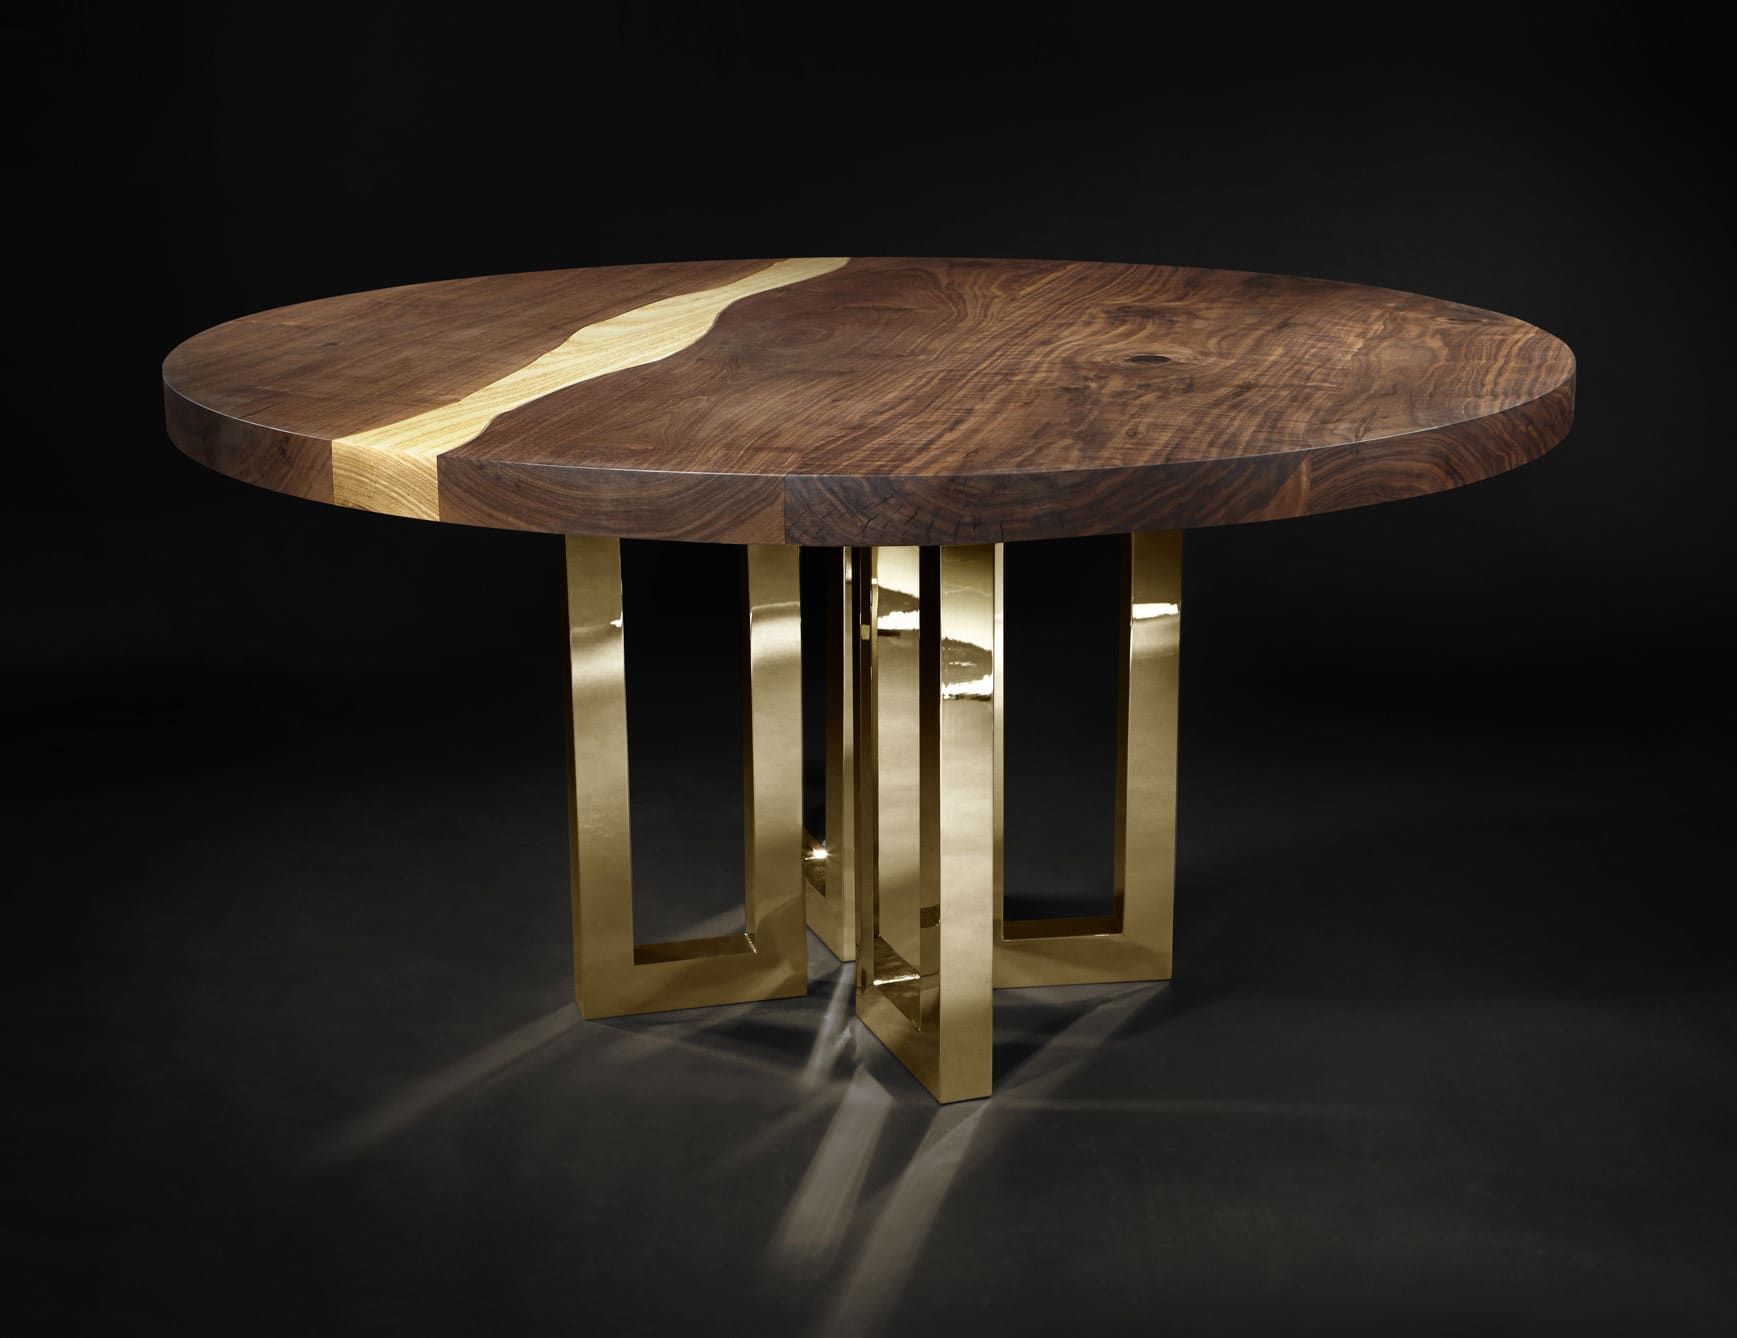 Dining Table 6 modern Italian table with brown Walnut Ash wood